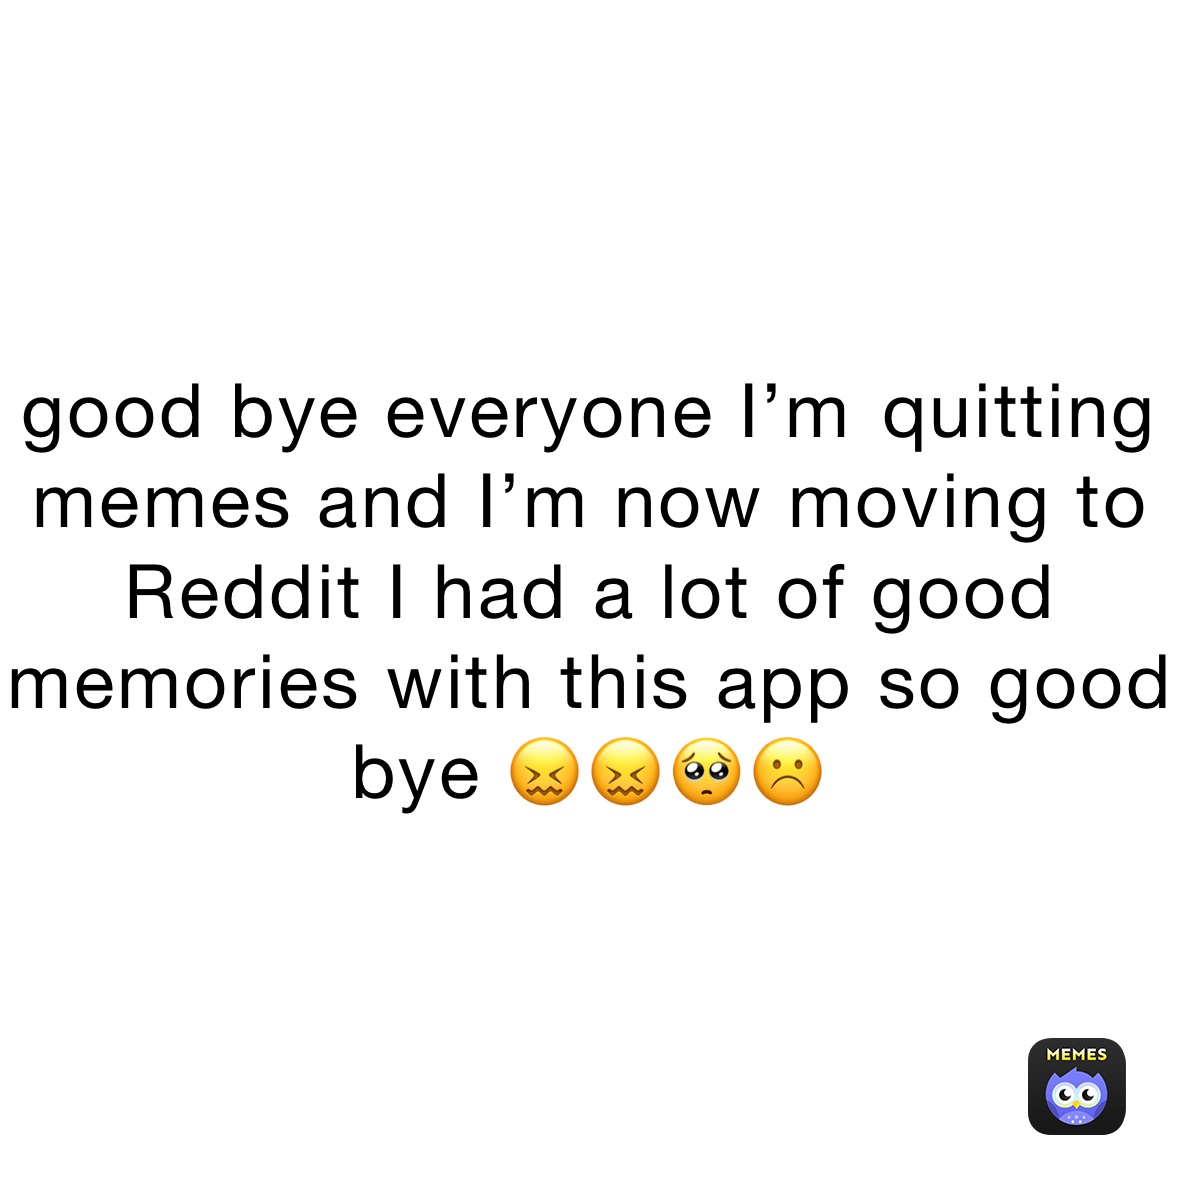 good bye everyone I’m ￼￼quitting￼memes and I’m now moving to Reddit I had a lot of good memories with this app so good bye 😖😖🥺☹️